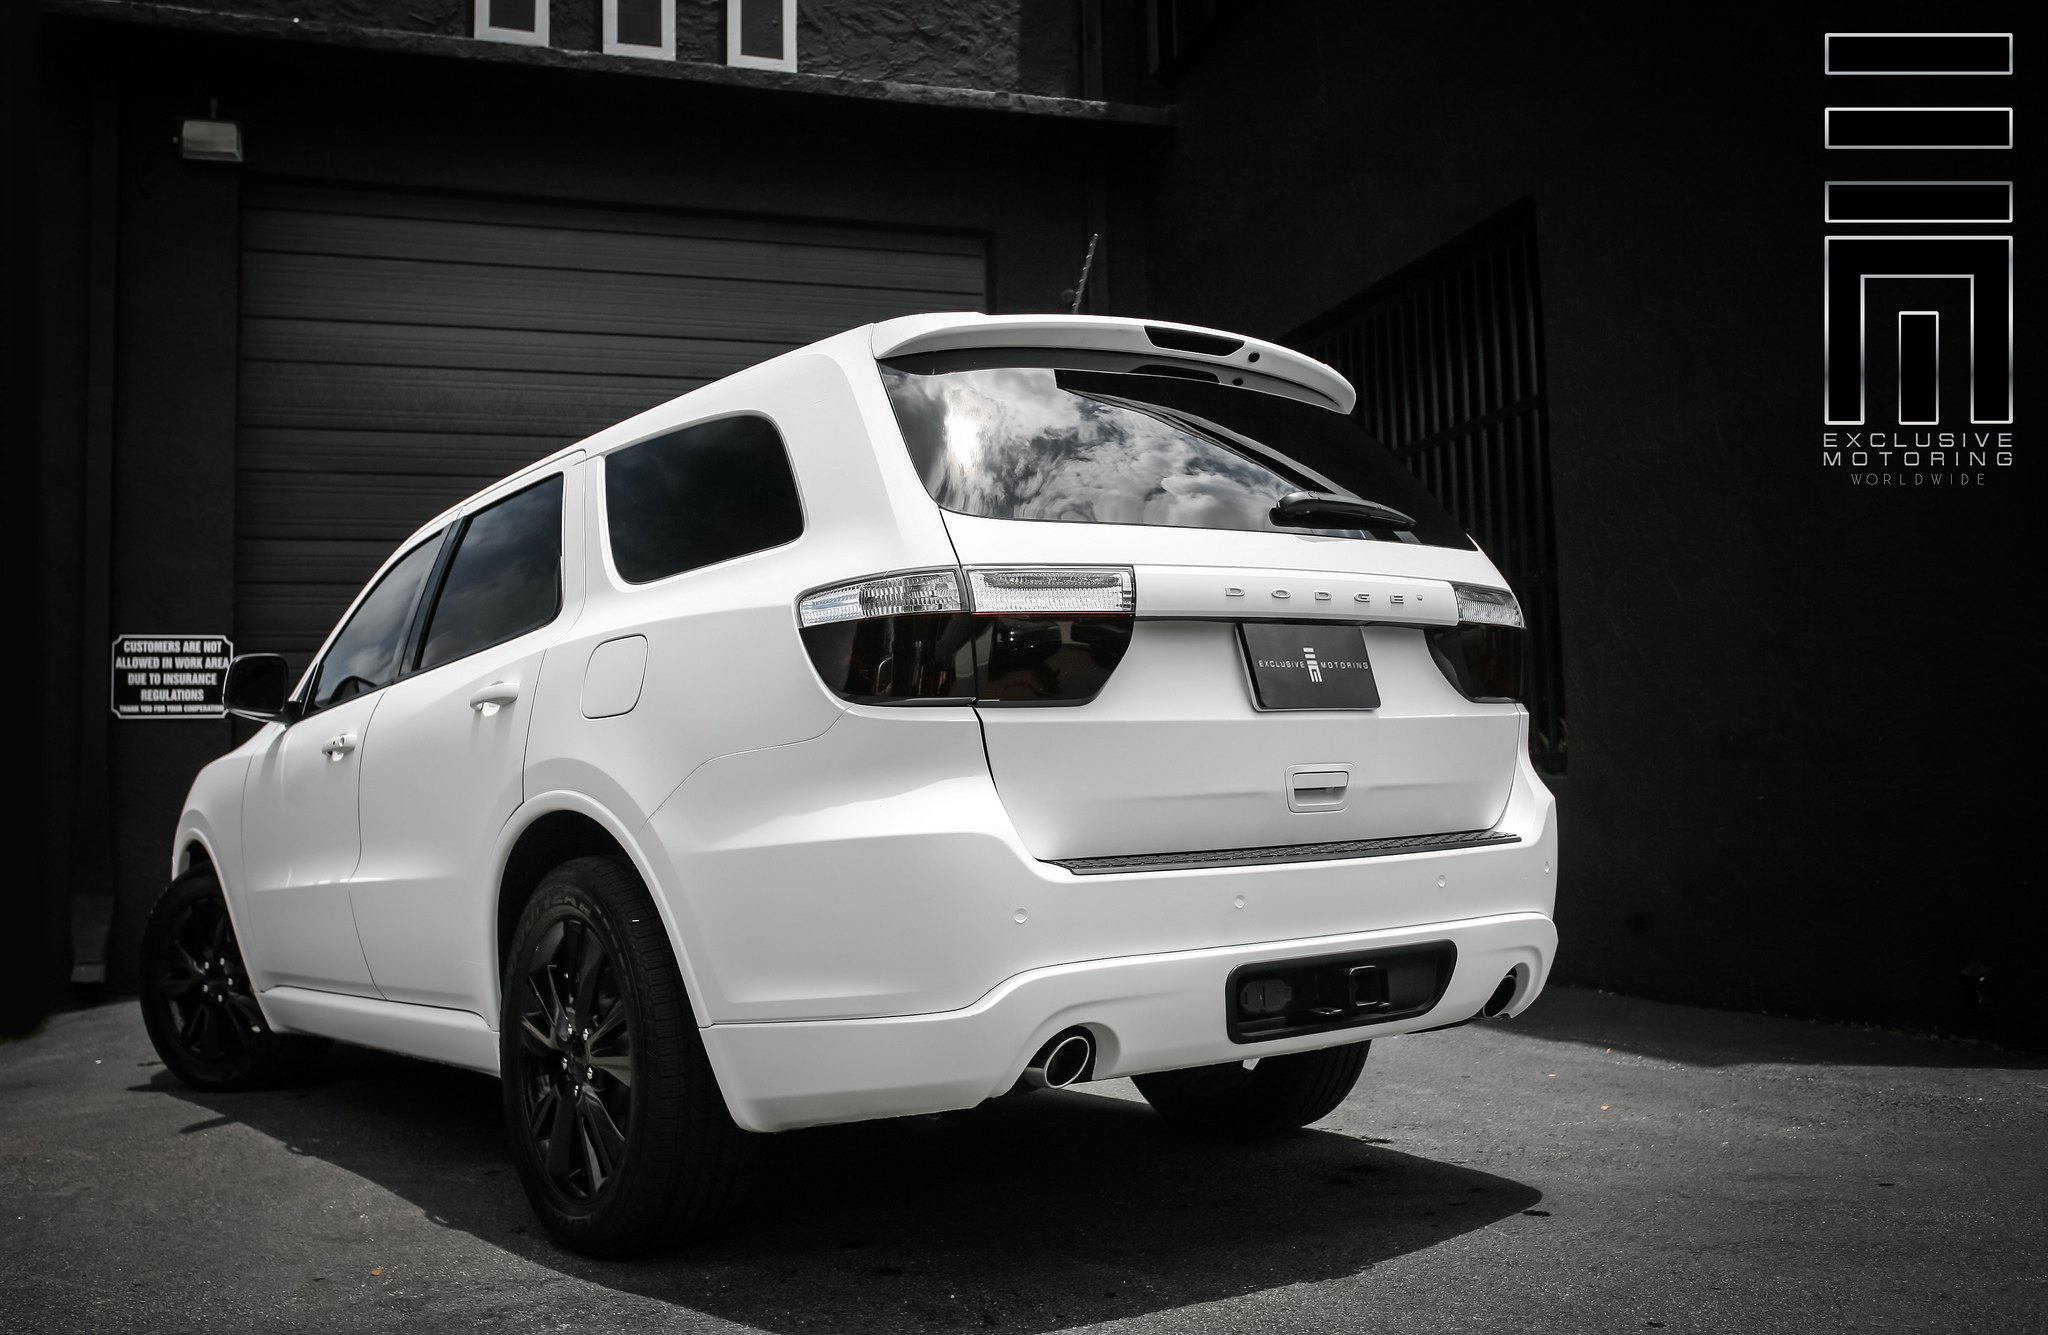 Dodge Durango R/T Colormatched Rear Valance - Photo by Exclusive Motoring